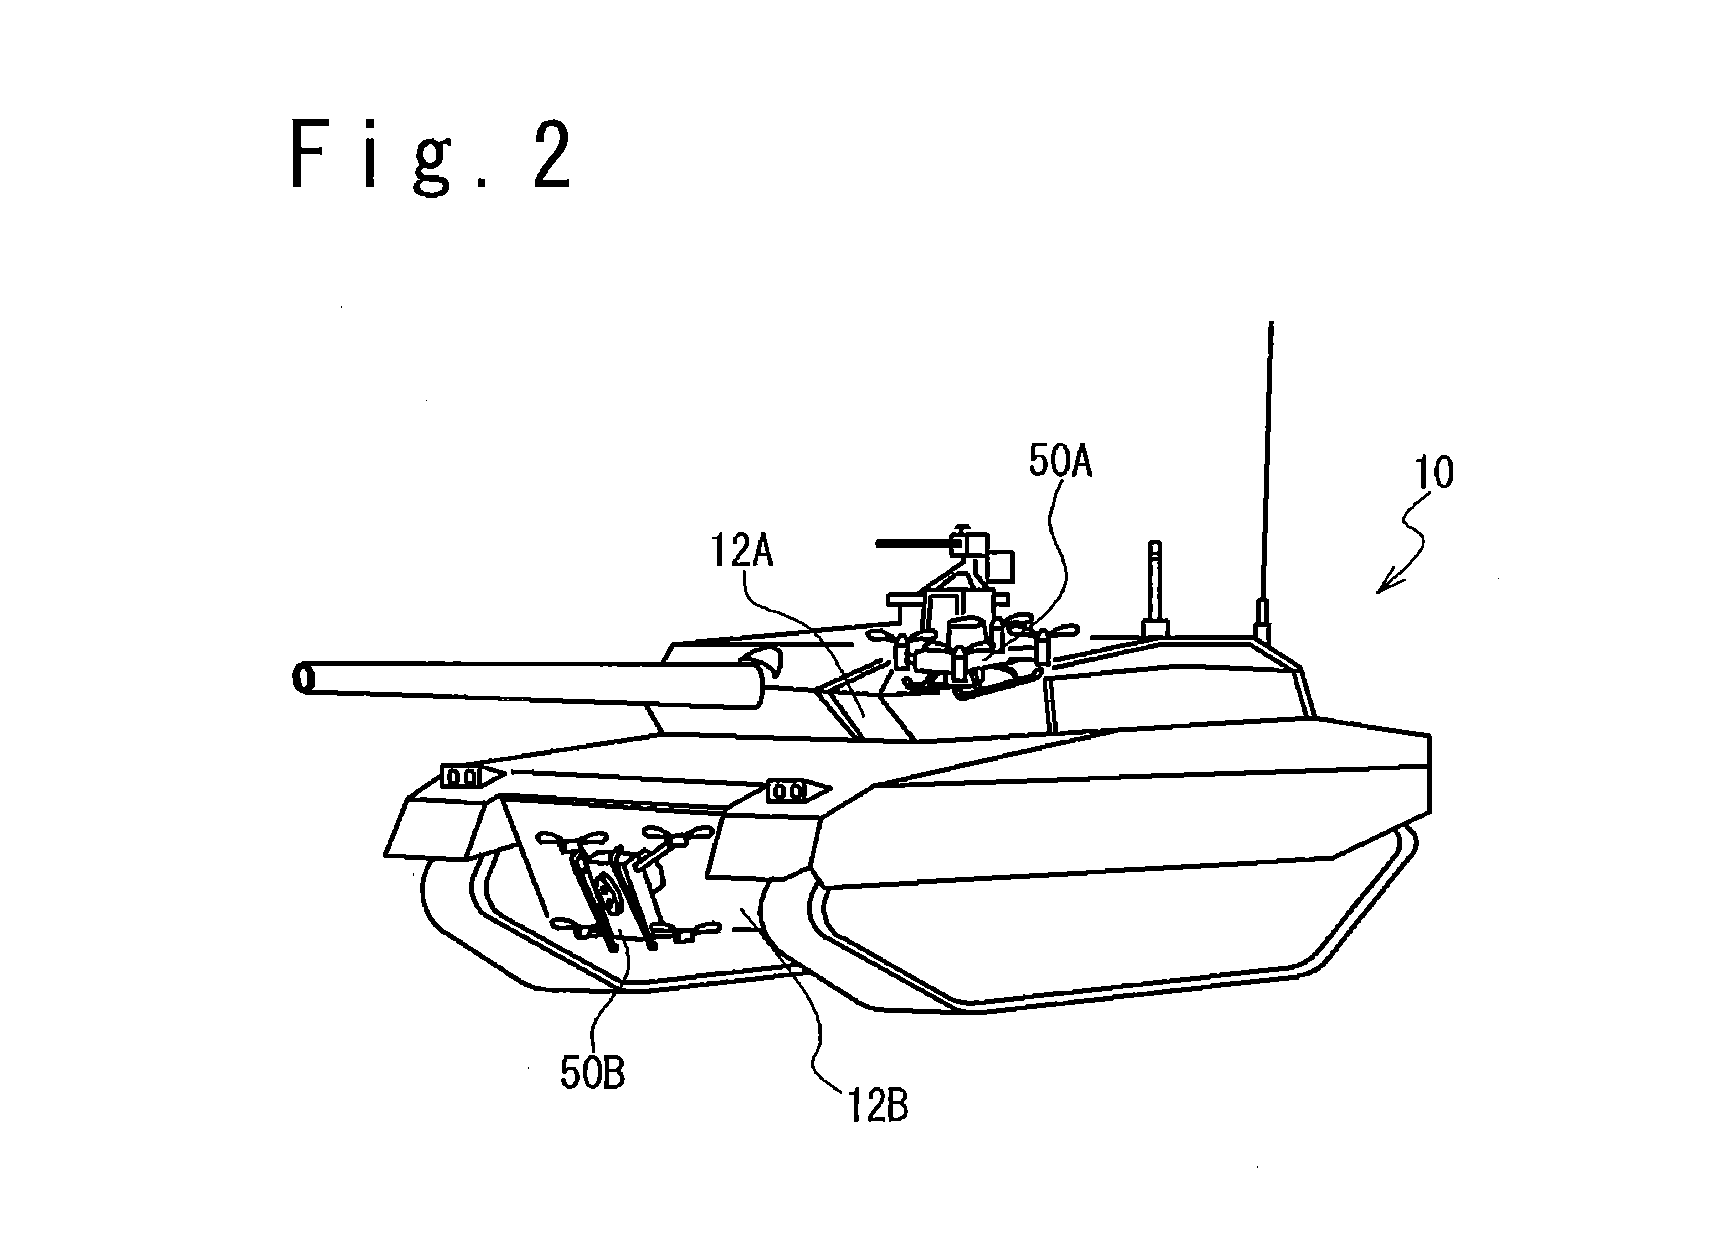 Modularized armor structure with unmanned aerial vehicle loaded and armored vehicle using the same